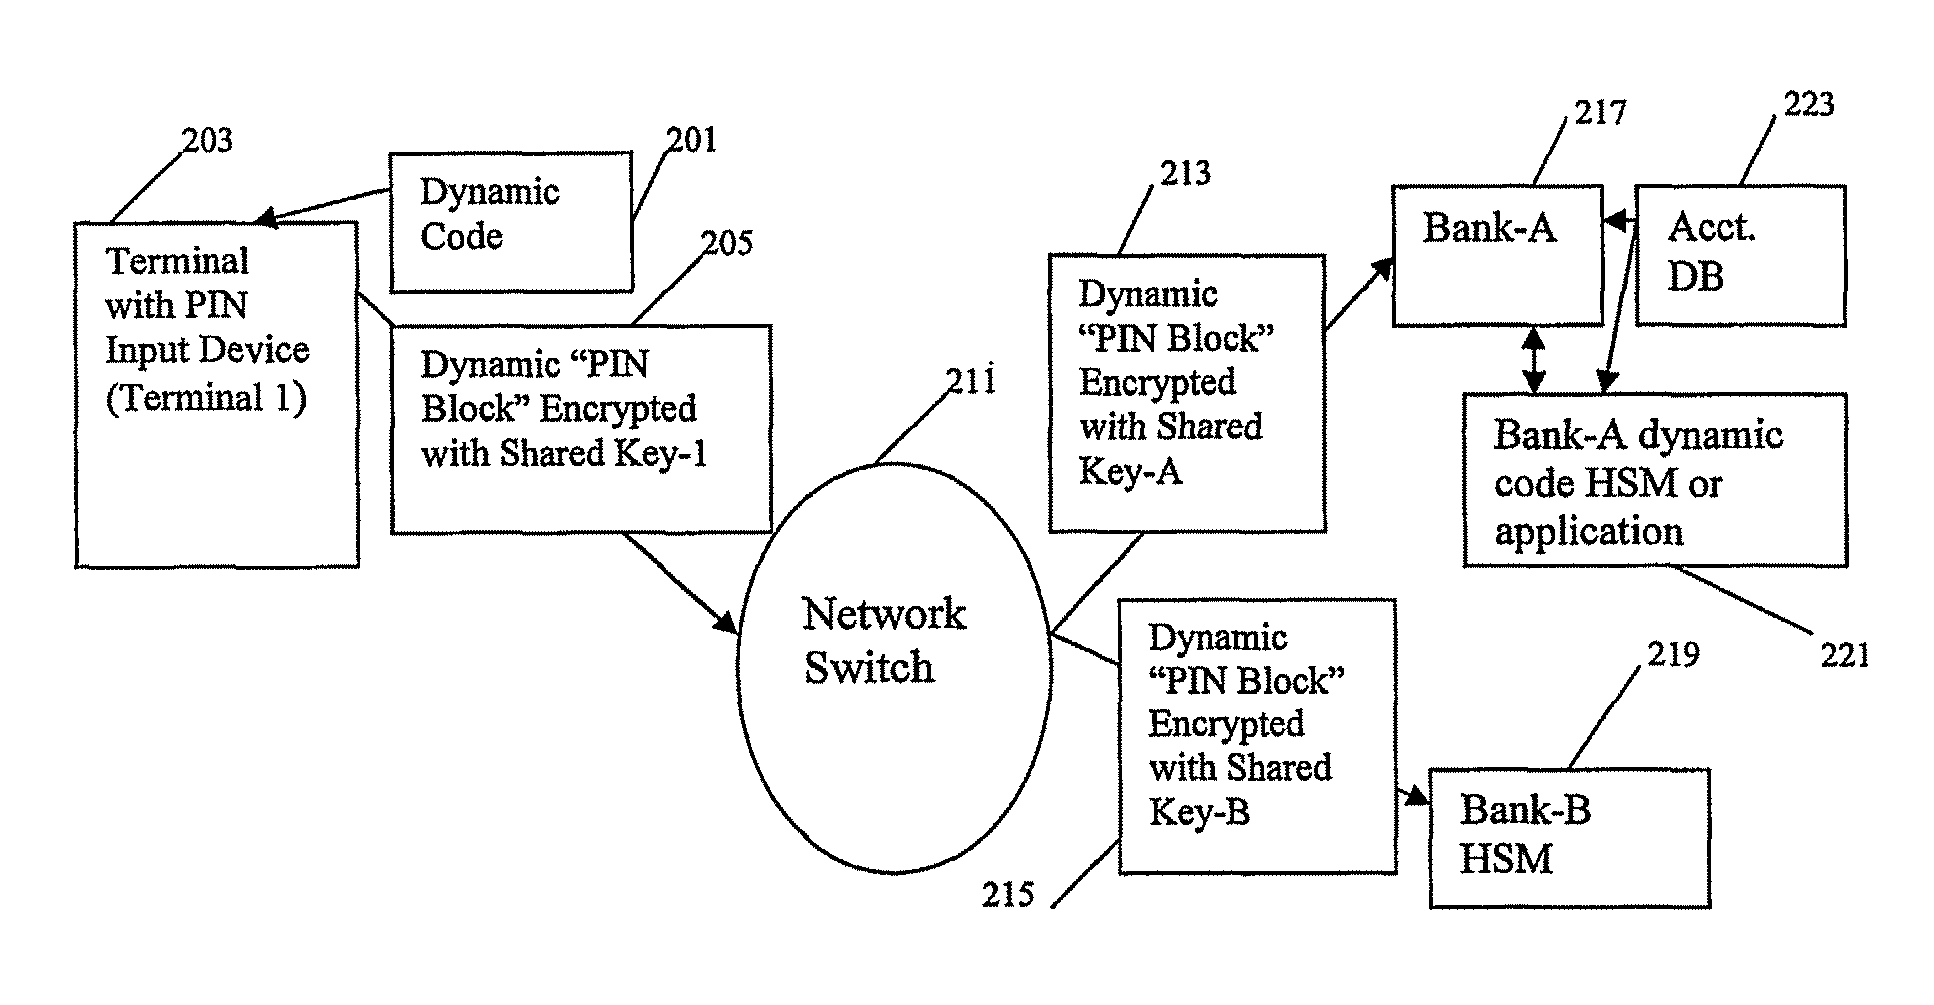 Method and system for performing a transaction using a dynamic authorization code